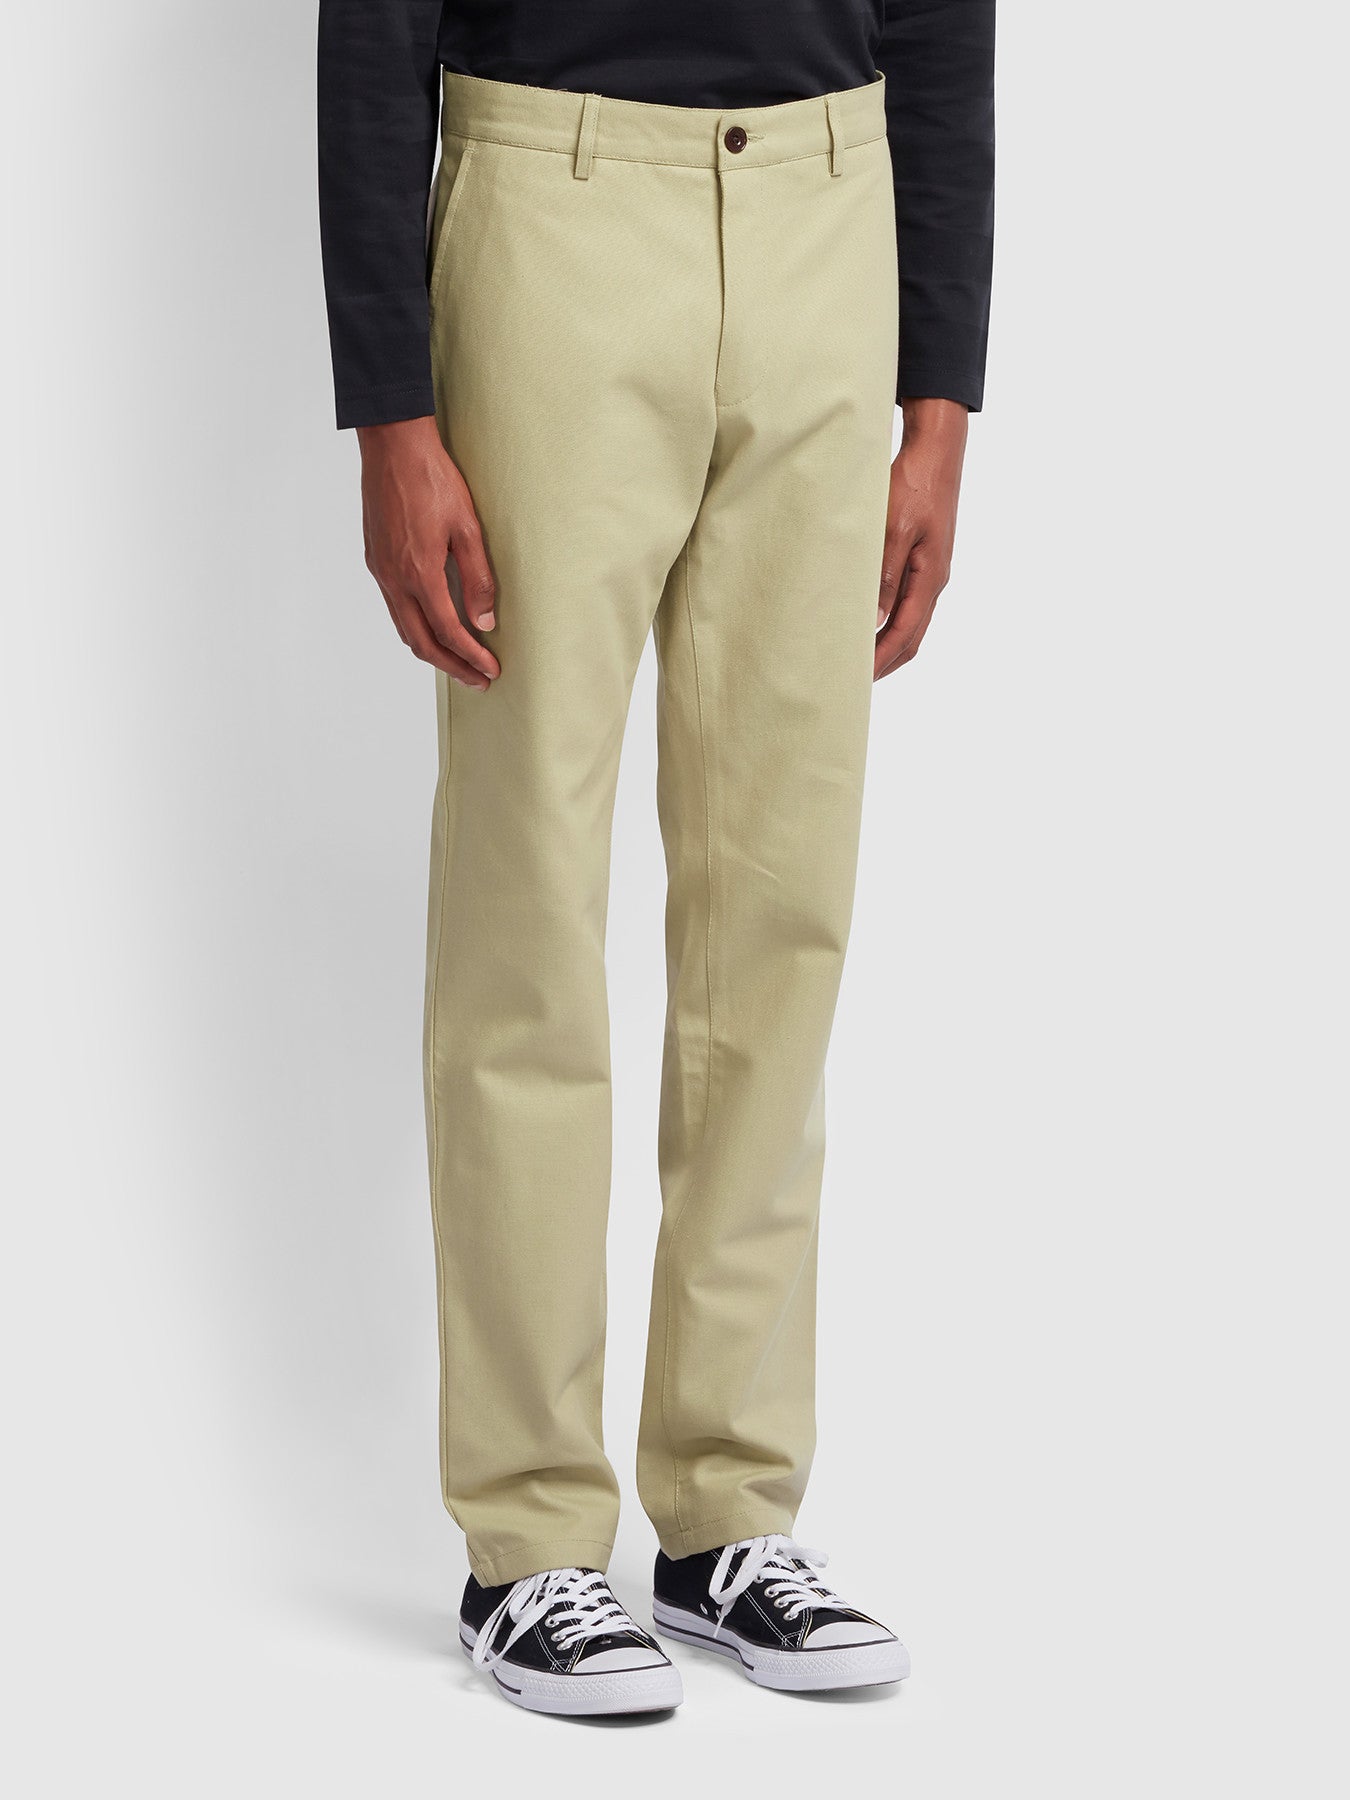 View Elm Regular Fit Cotton Hopsack Trousers In Sandstone information